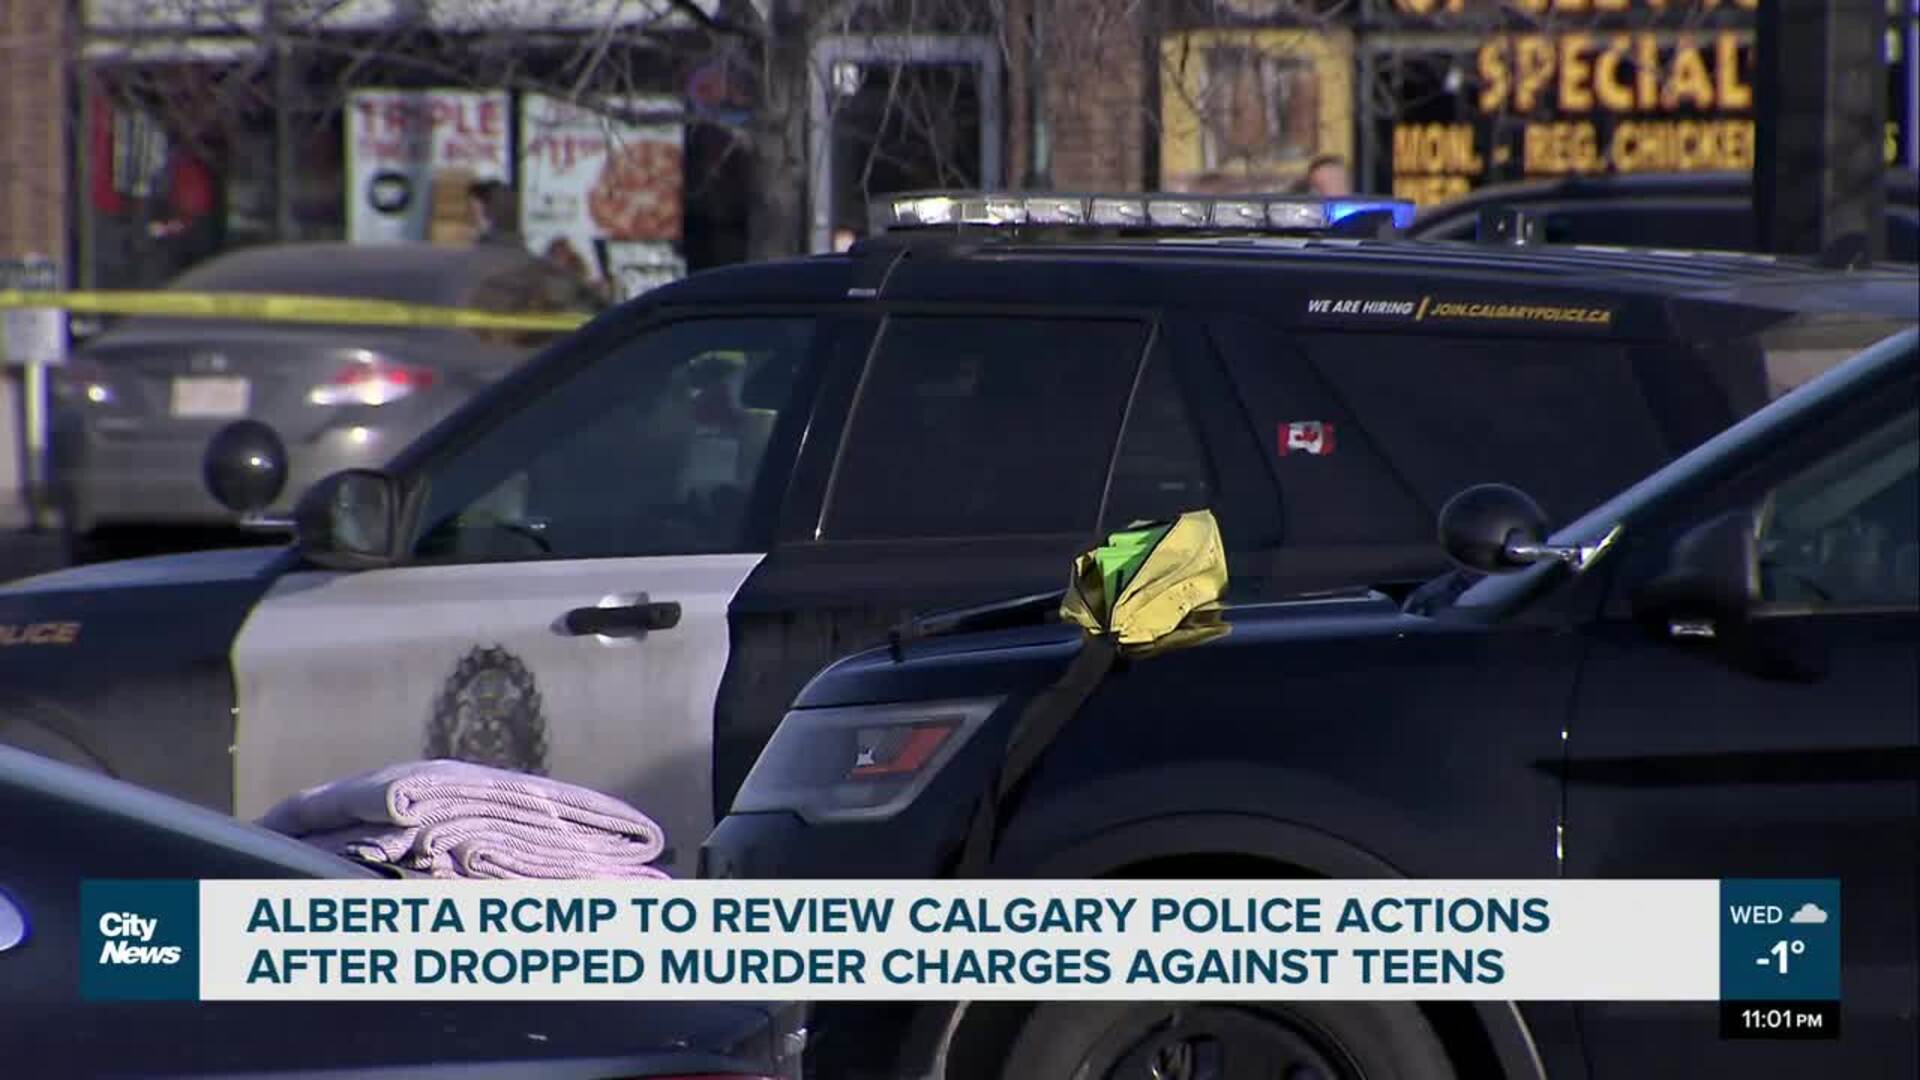 Alberta RCMP to review Calgary police after incorrect murder charges